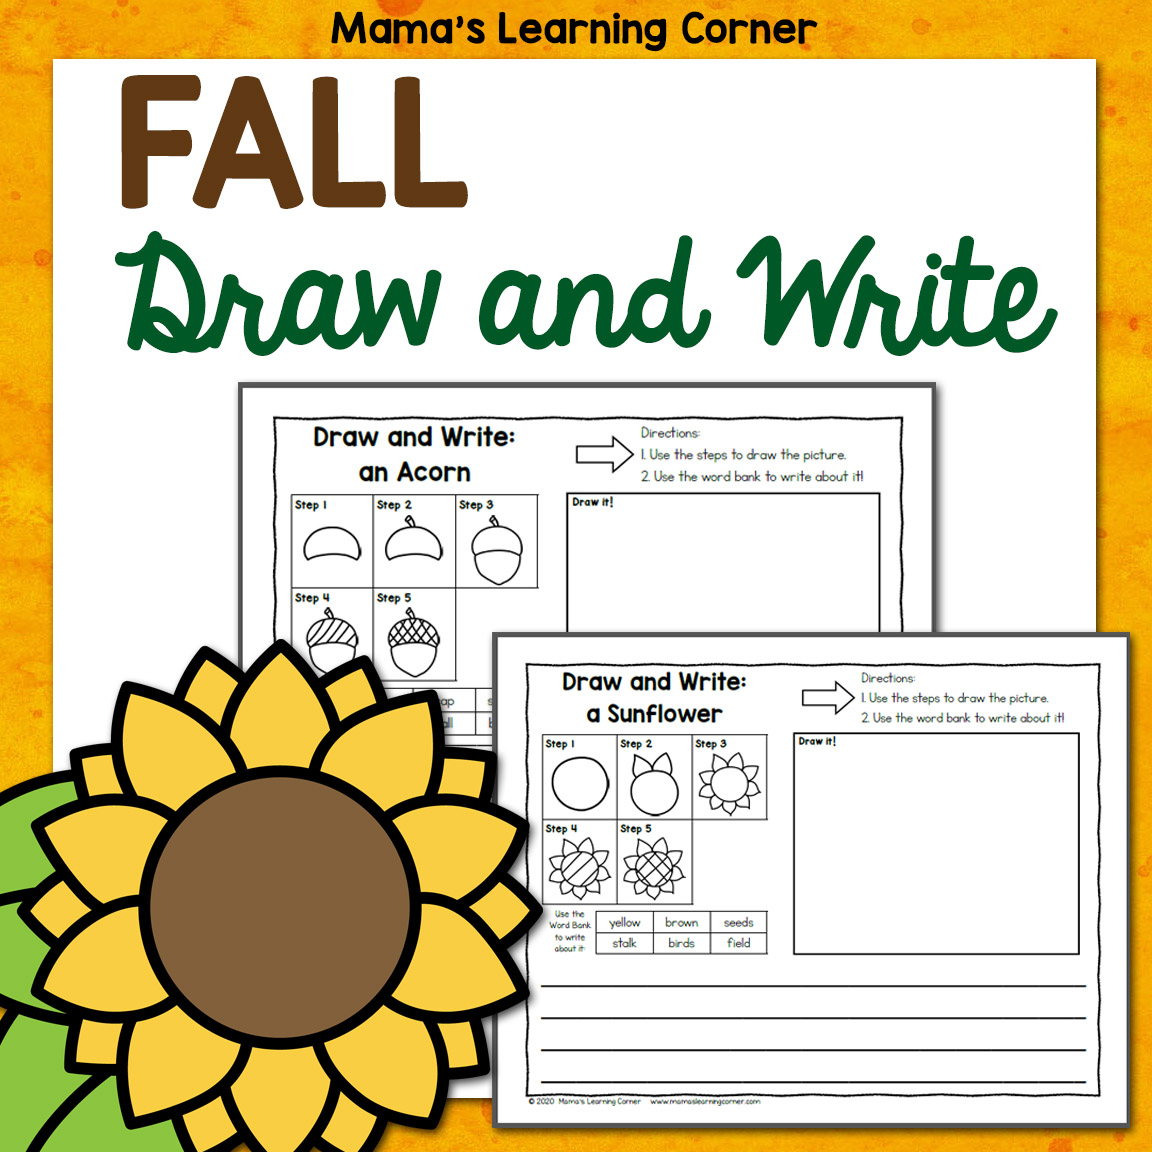 fall-directed-draw-and-write-worksheets-mamas-learning-corner